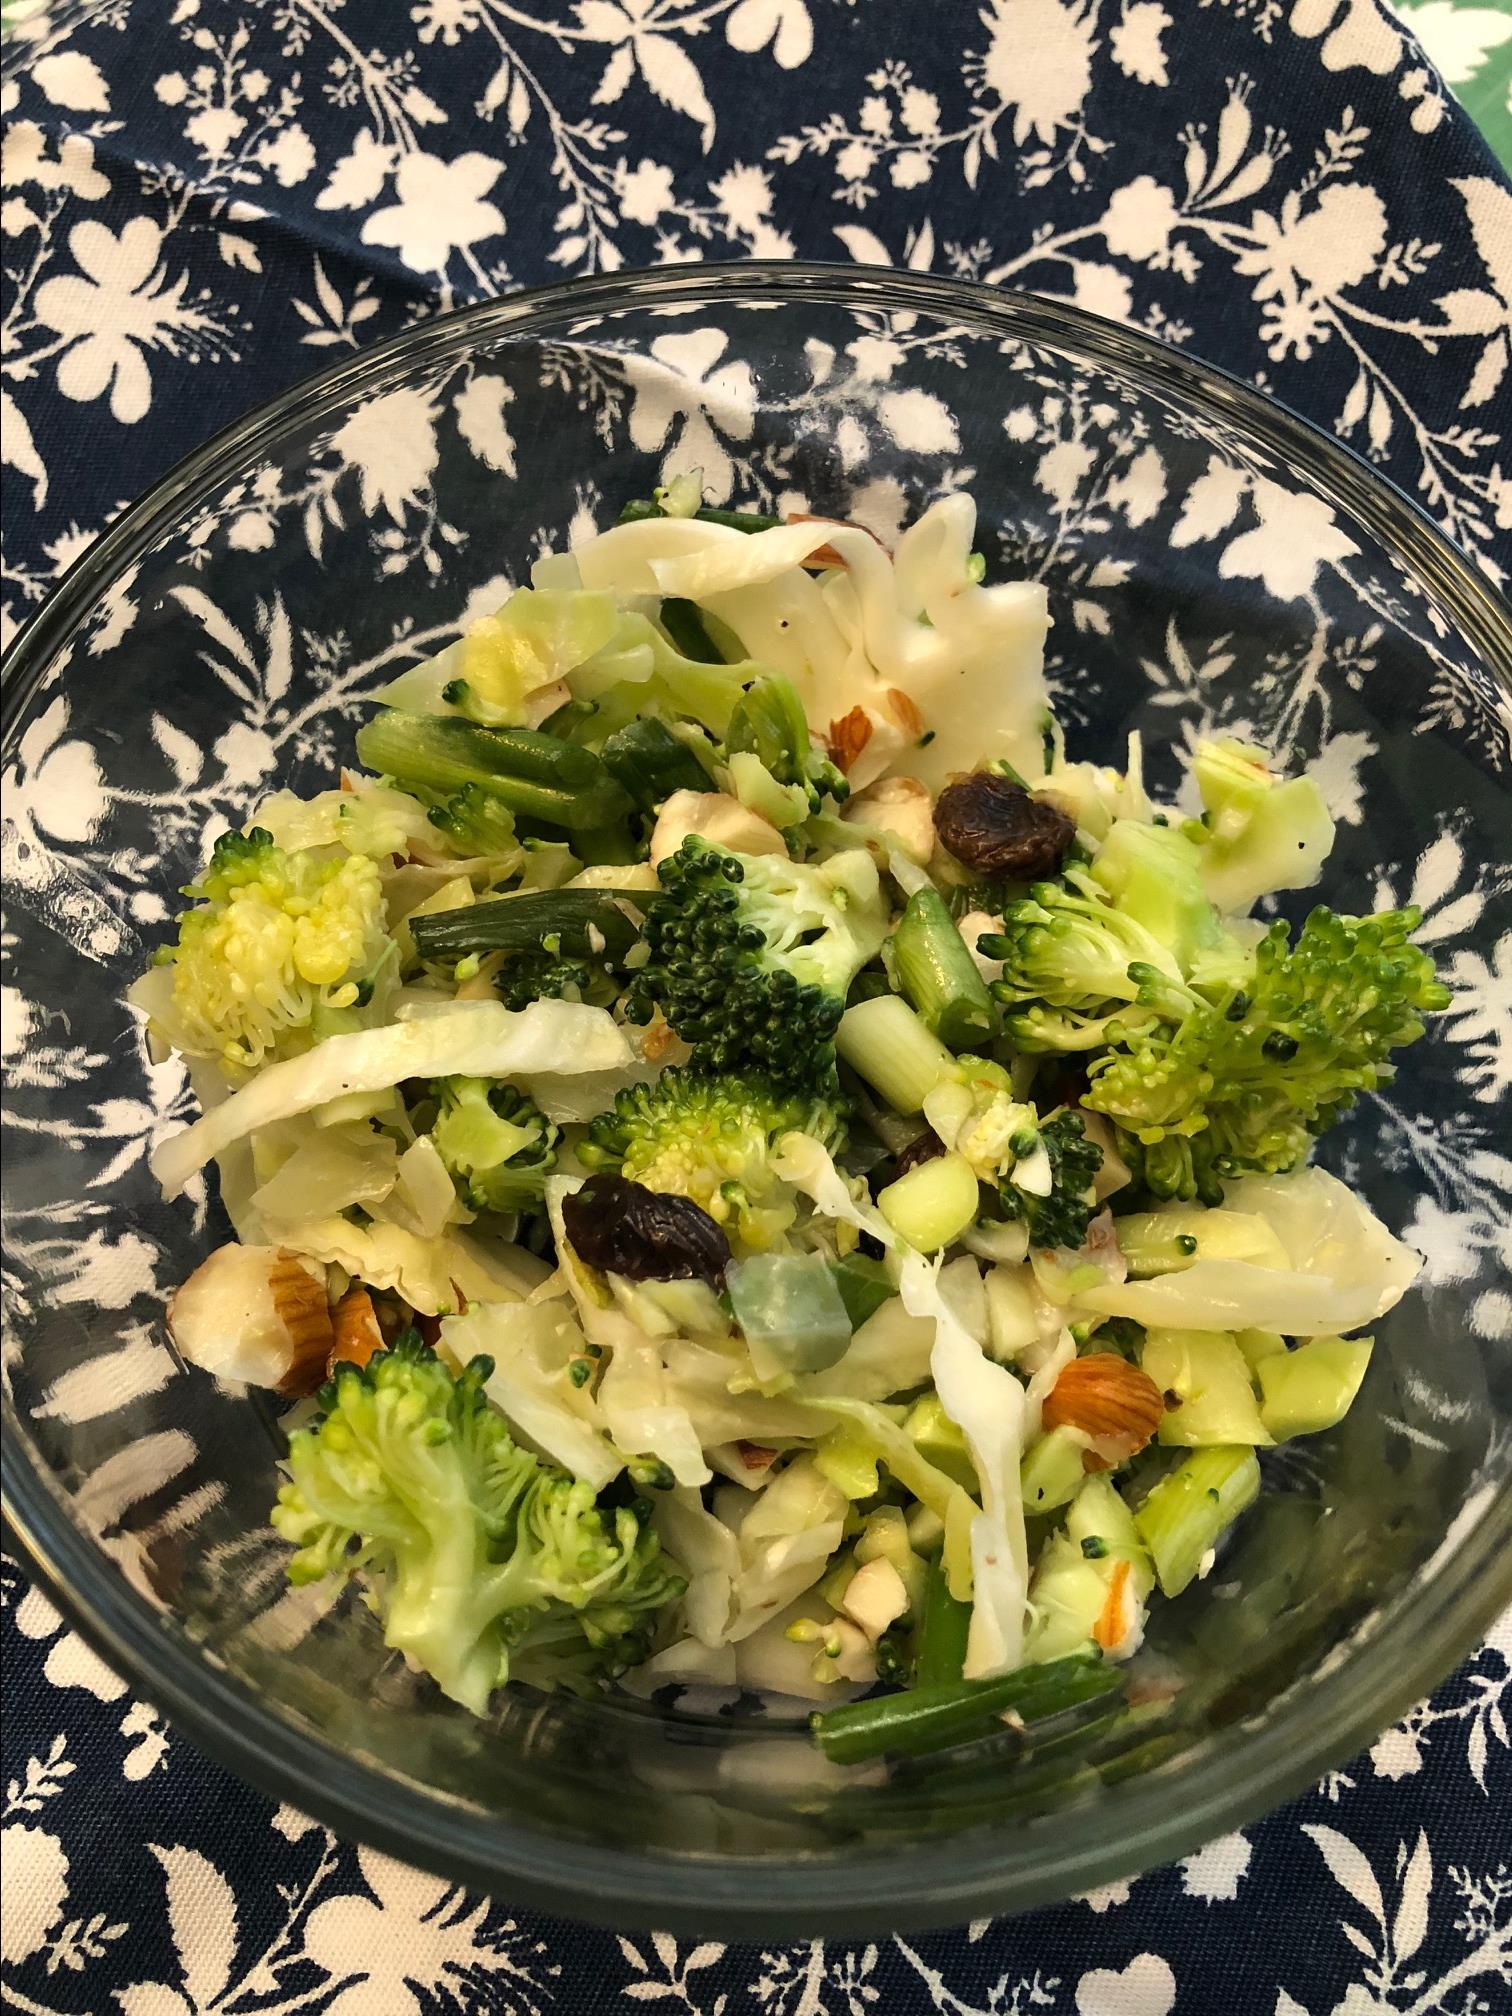 Cabbage and Broccoli Slaw with Vinegar Dressing 